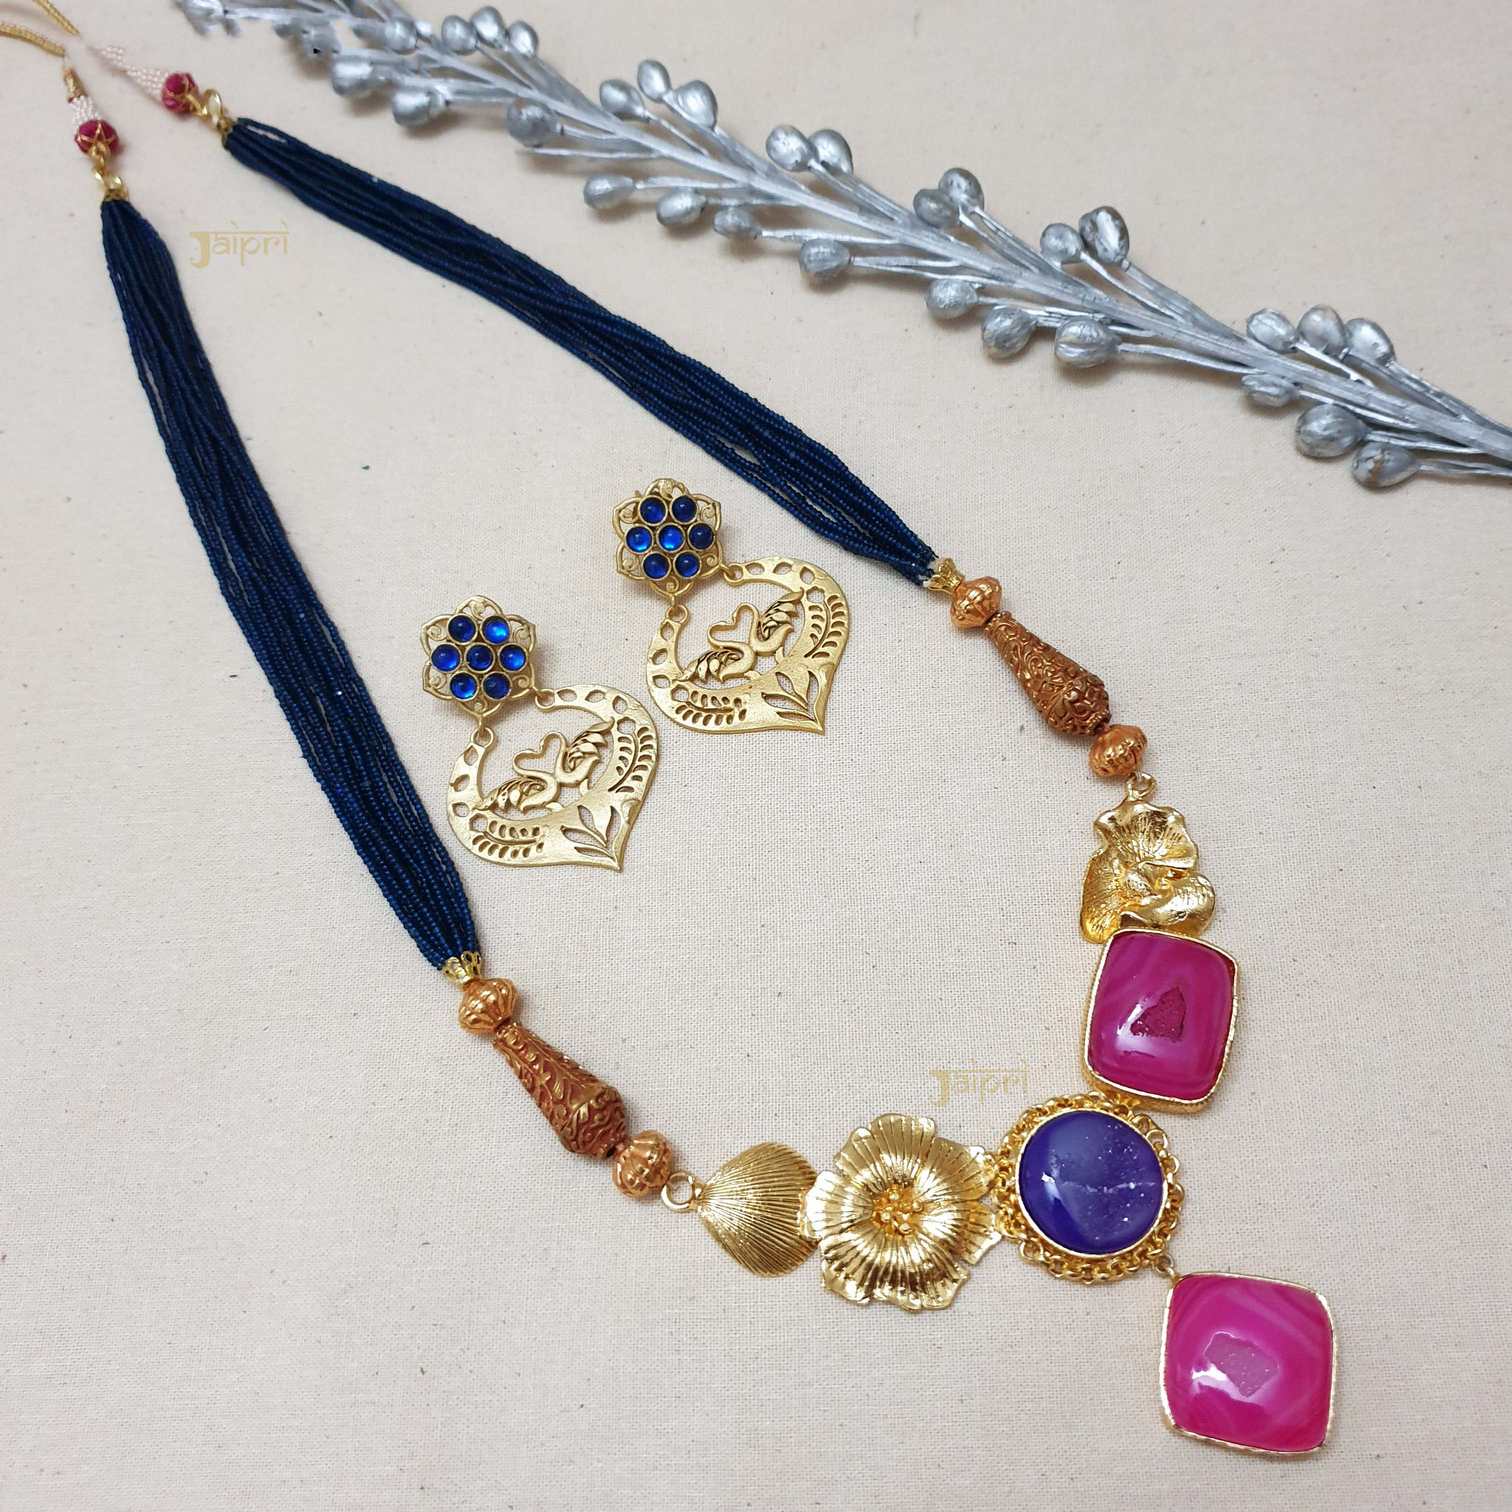 Pink & Lapis Stone Fusion Gold Pendant With Earrings